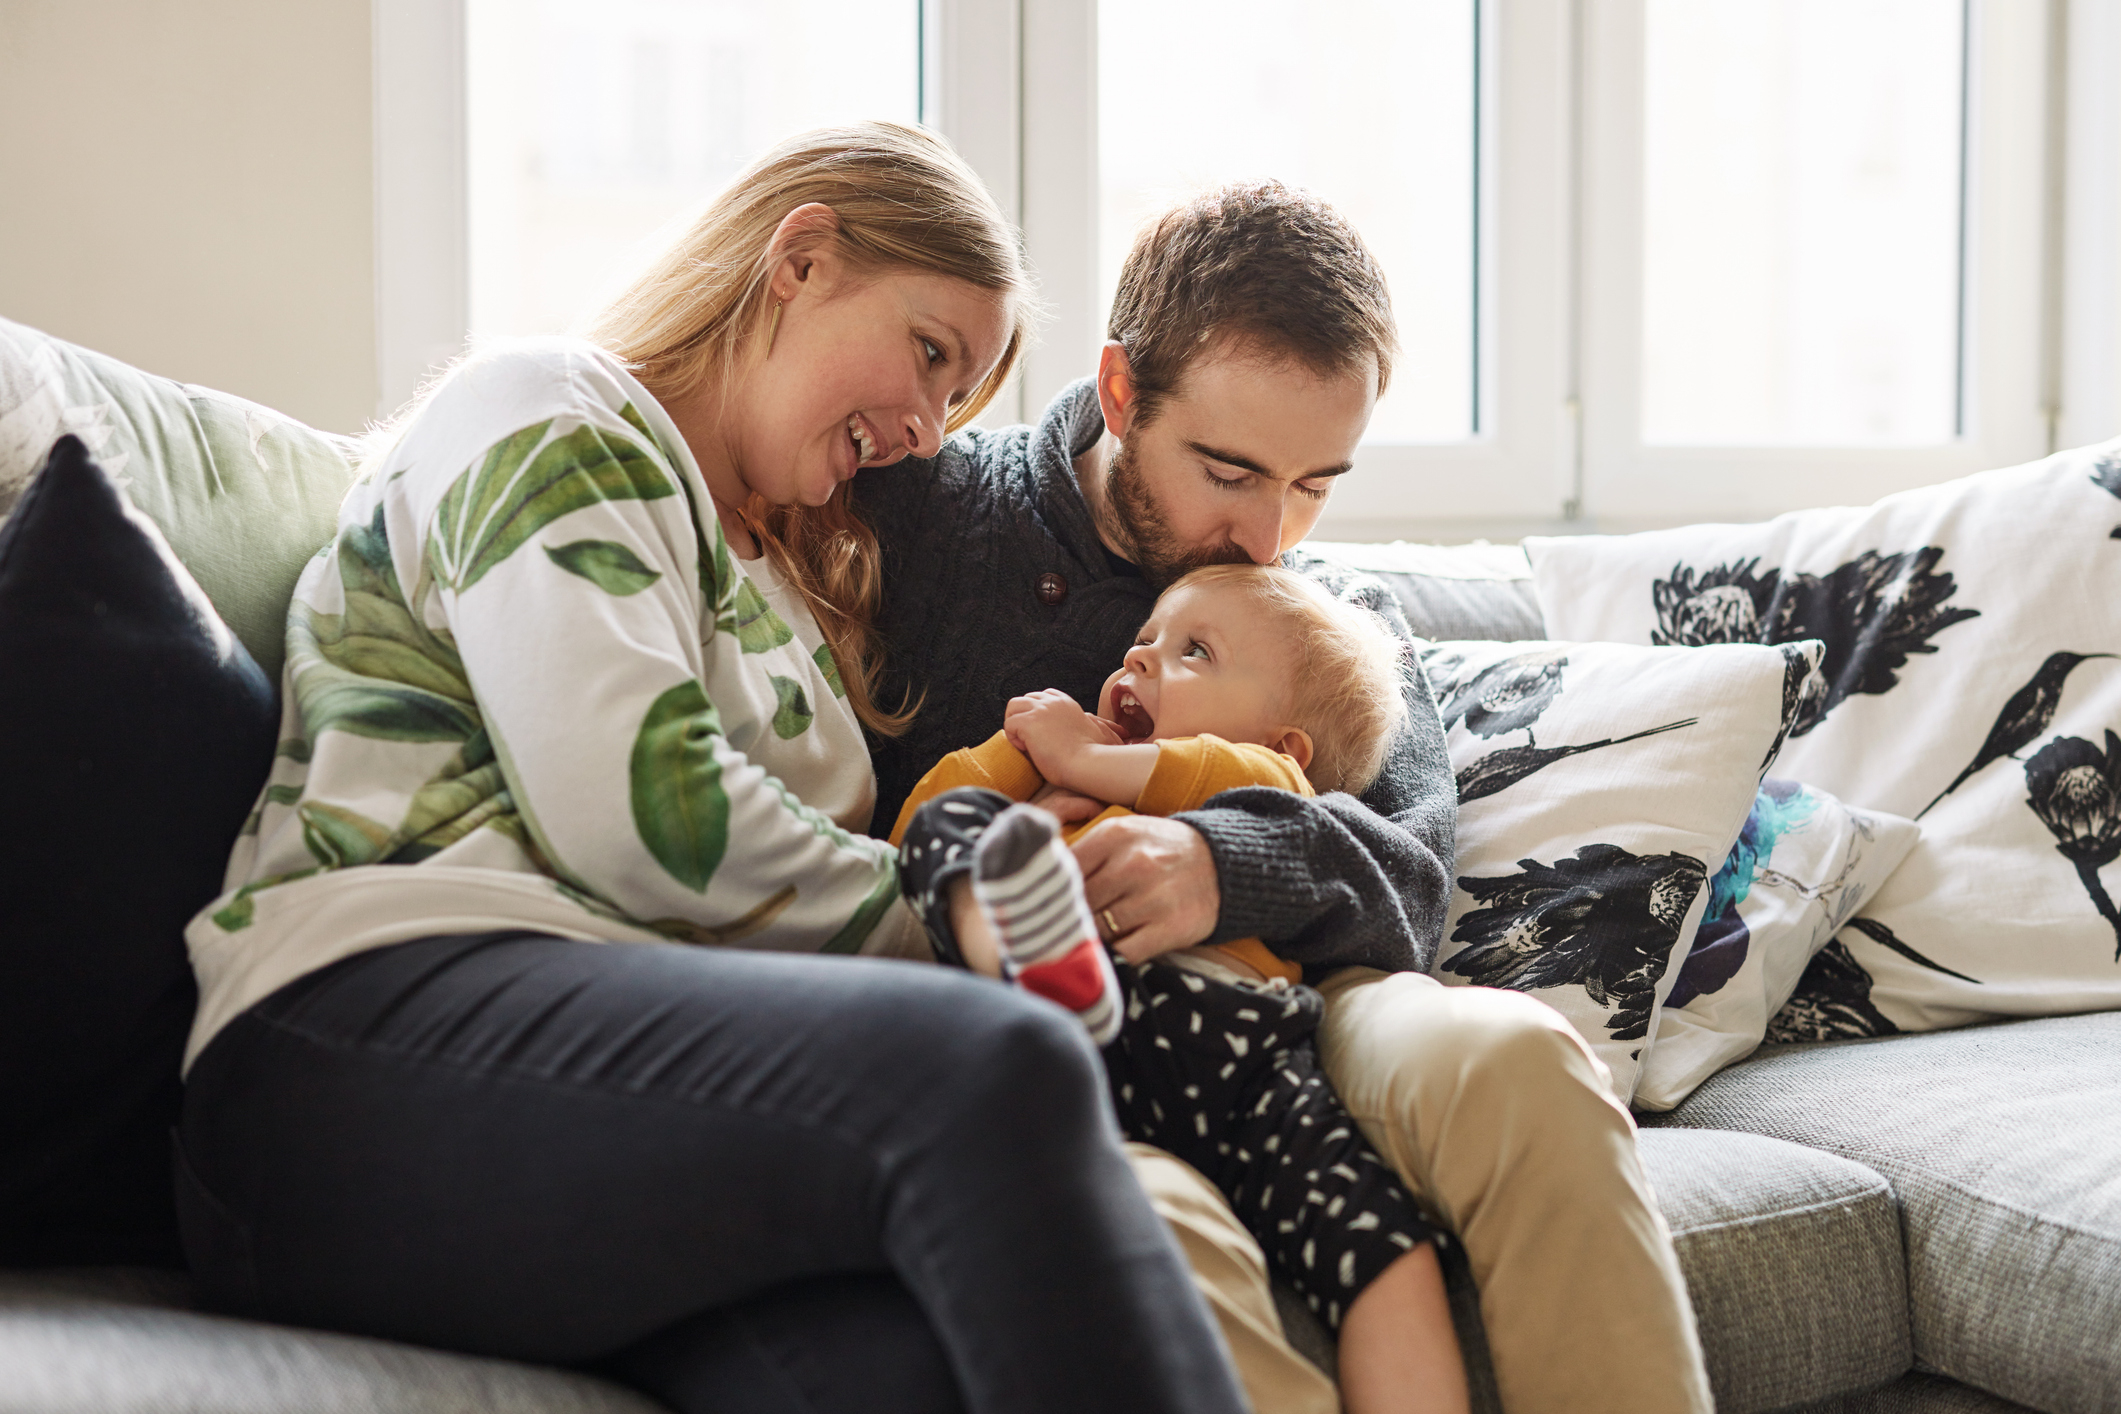 Couple and baby sitting on sofa, sharing a joyful moment, suggesting family intimacy and love